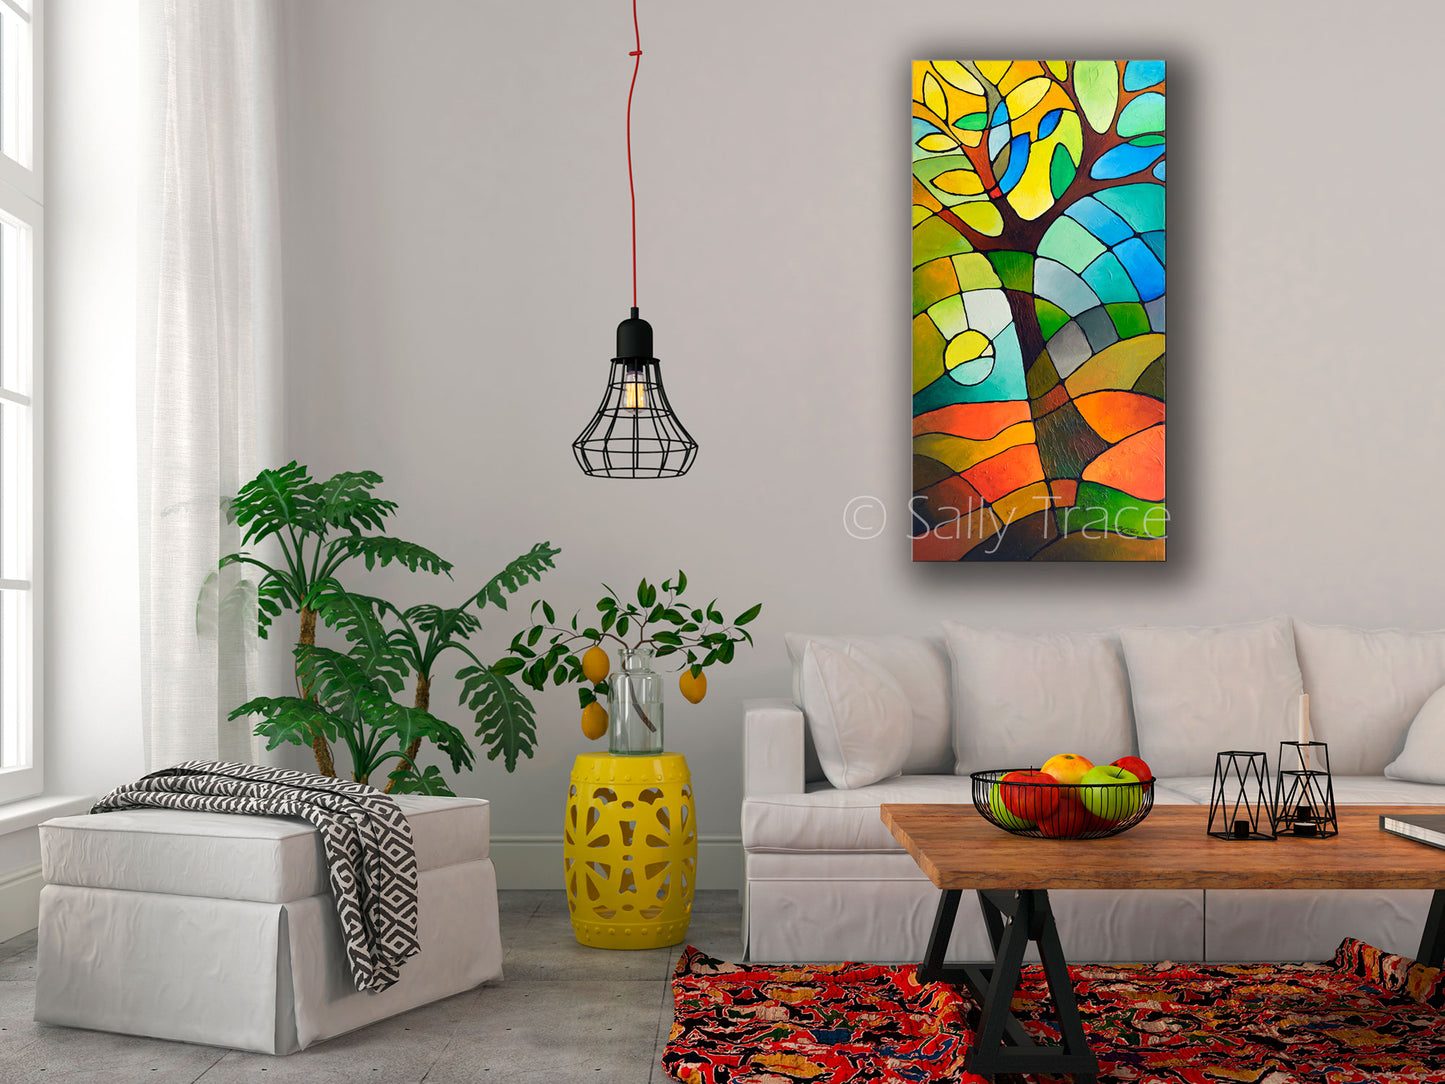 Summer Tree, a textured geometric abstract tree painting by Sally Trace